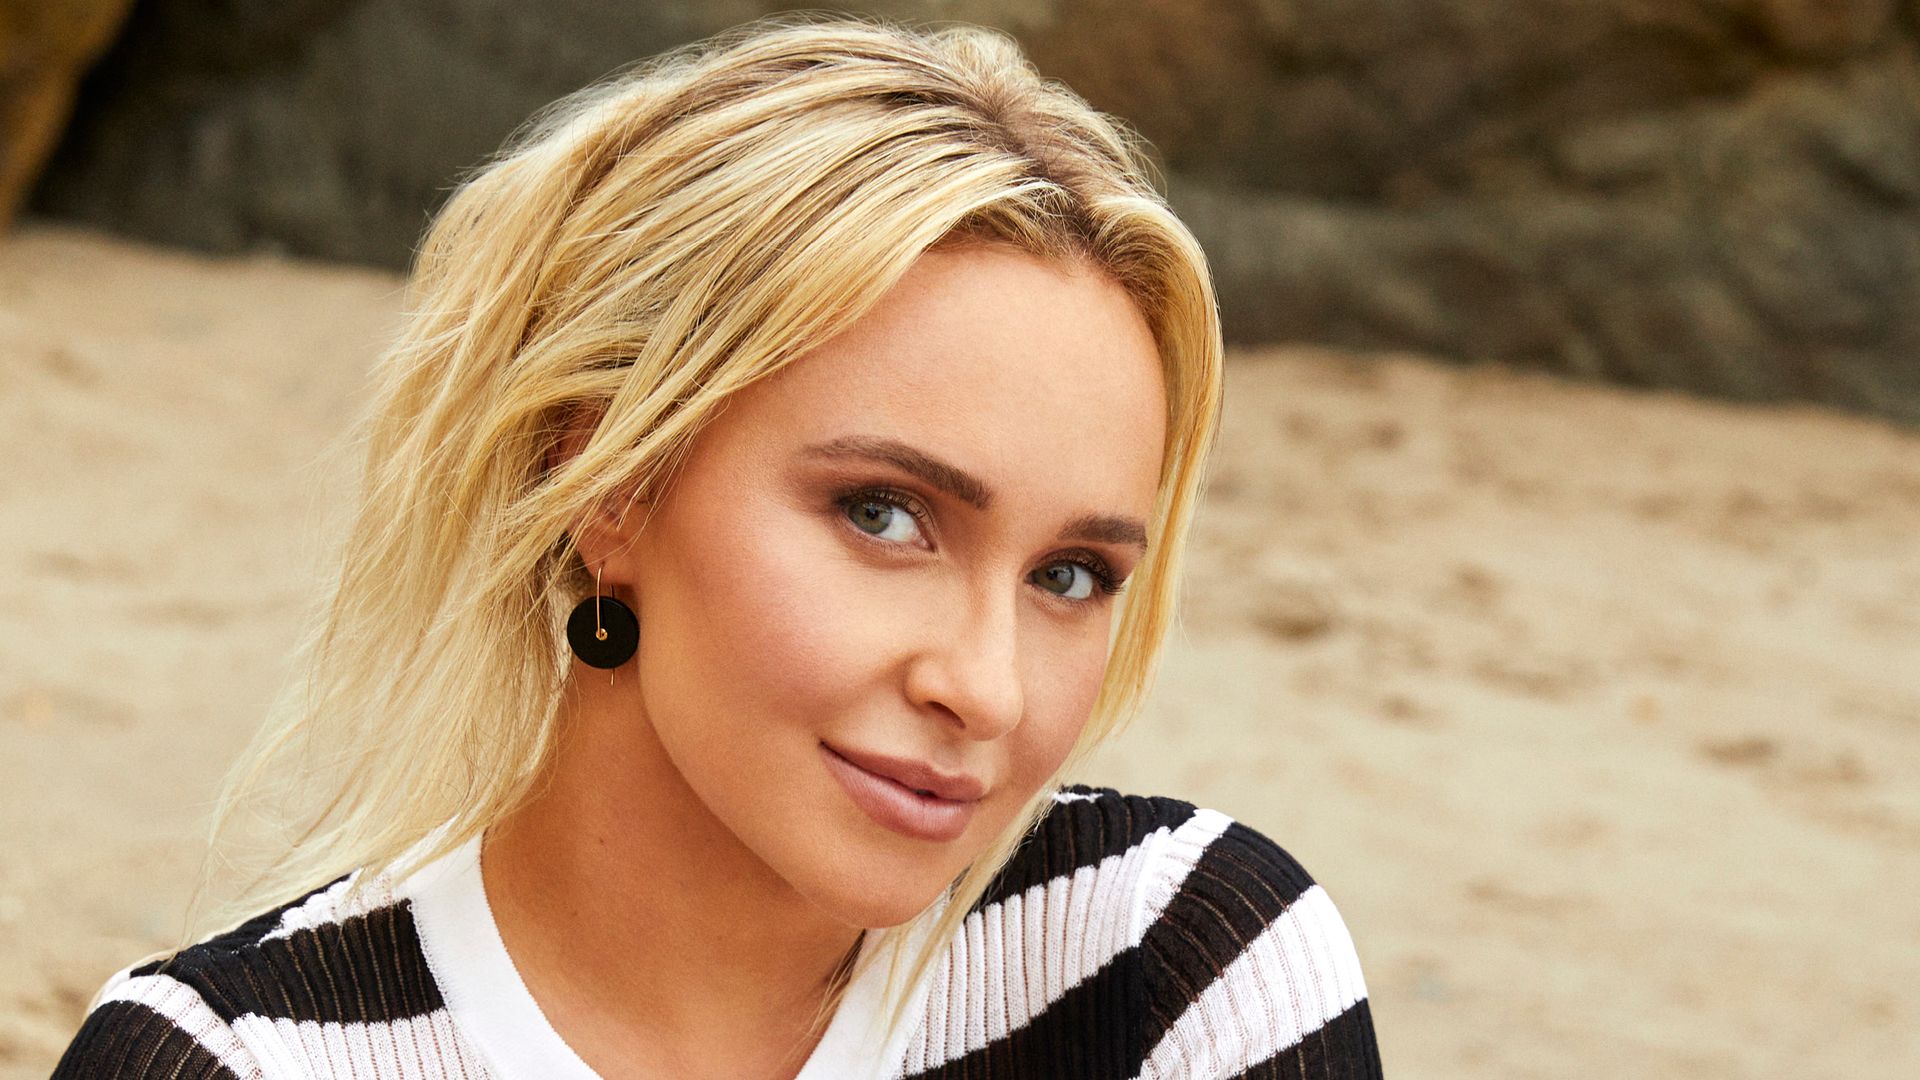 Hayden Panettiere reveals why she relapsed amid addiction battle that left her 'swollen and jaundiced'